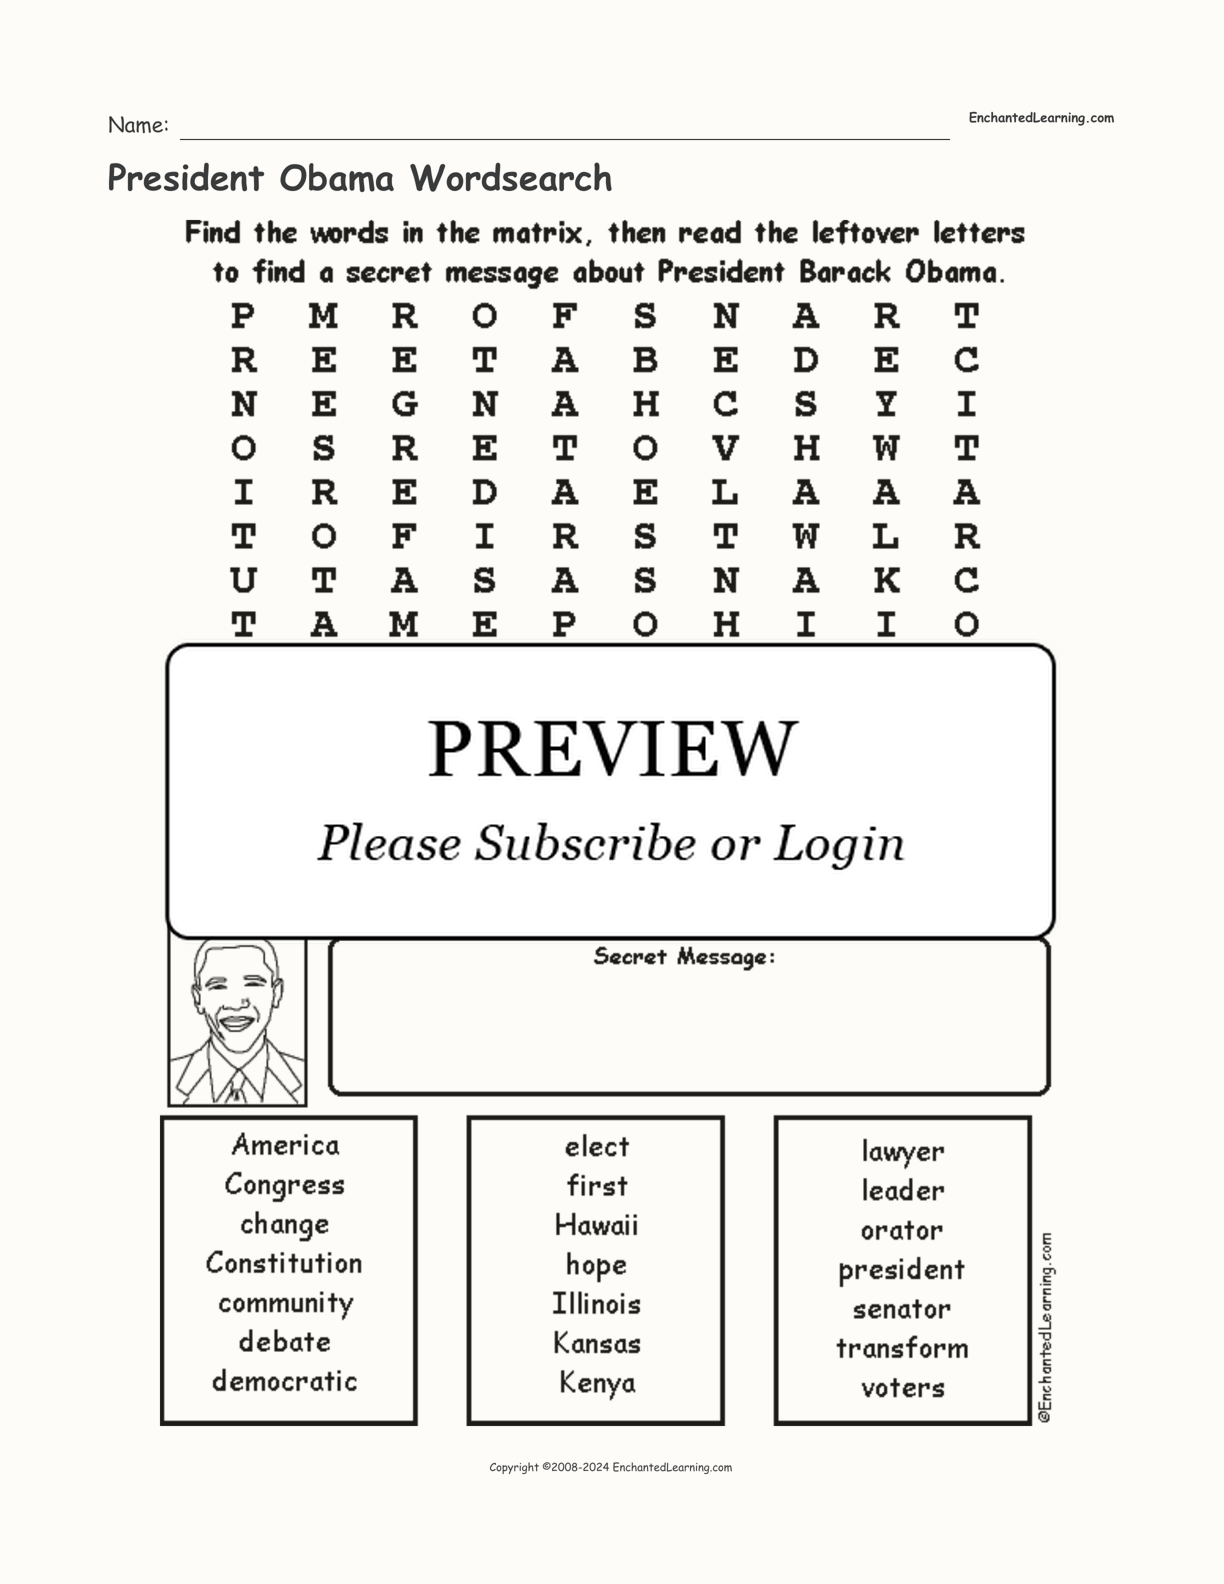 President Obama Wordsearch interactive worksheet page 1